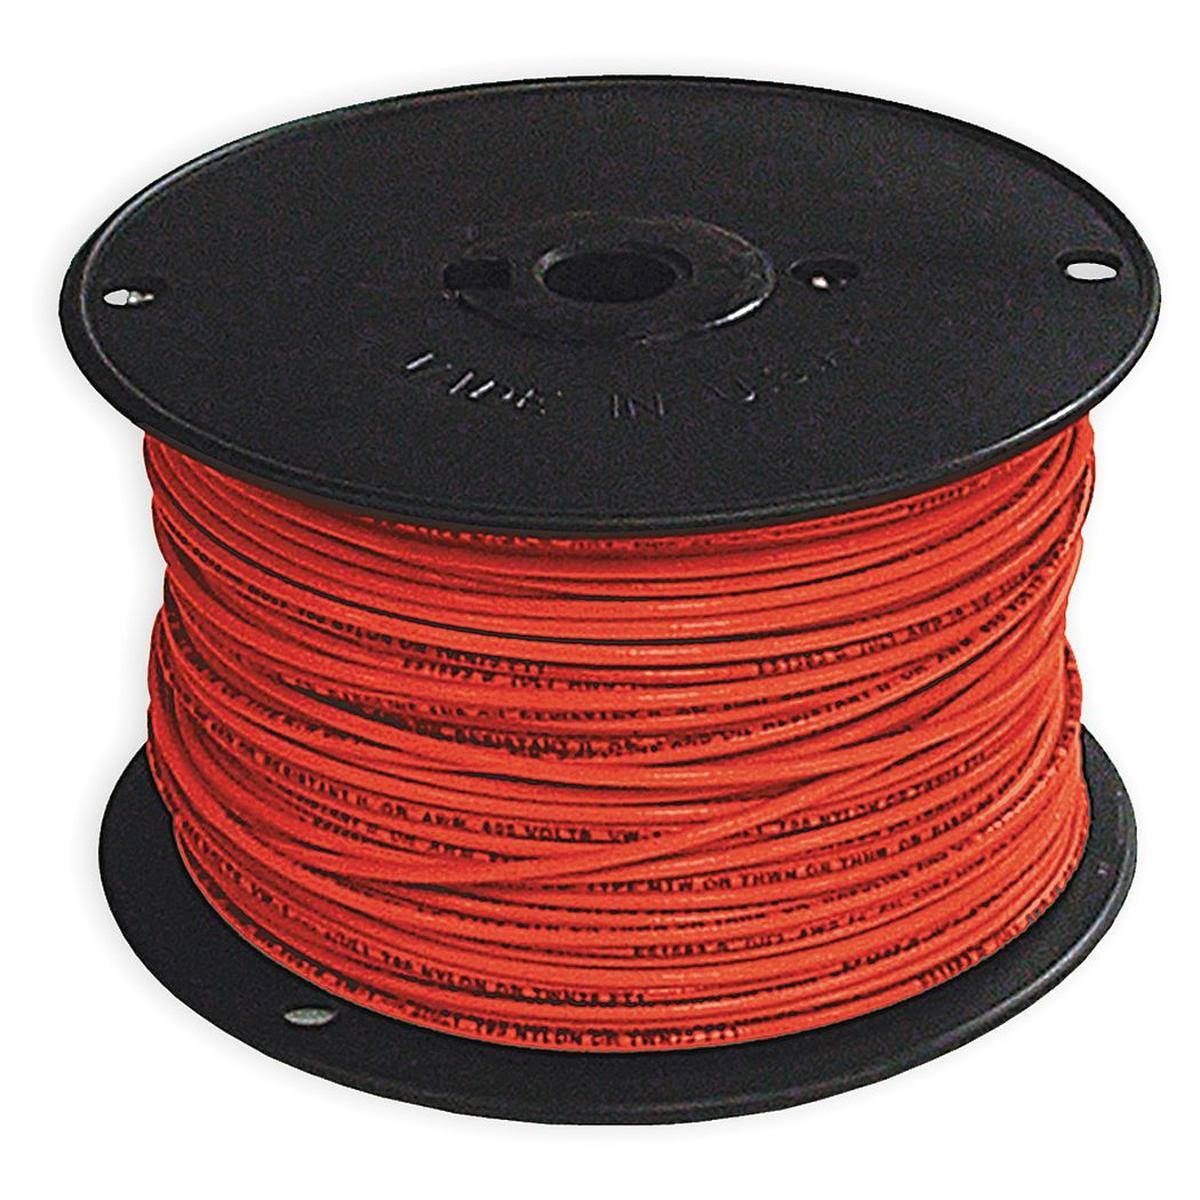 Red Southwire Copper Wire Spool - 600v, 12 AWG, 500', 19 Strand, Red